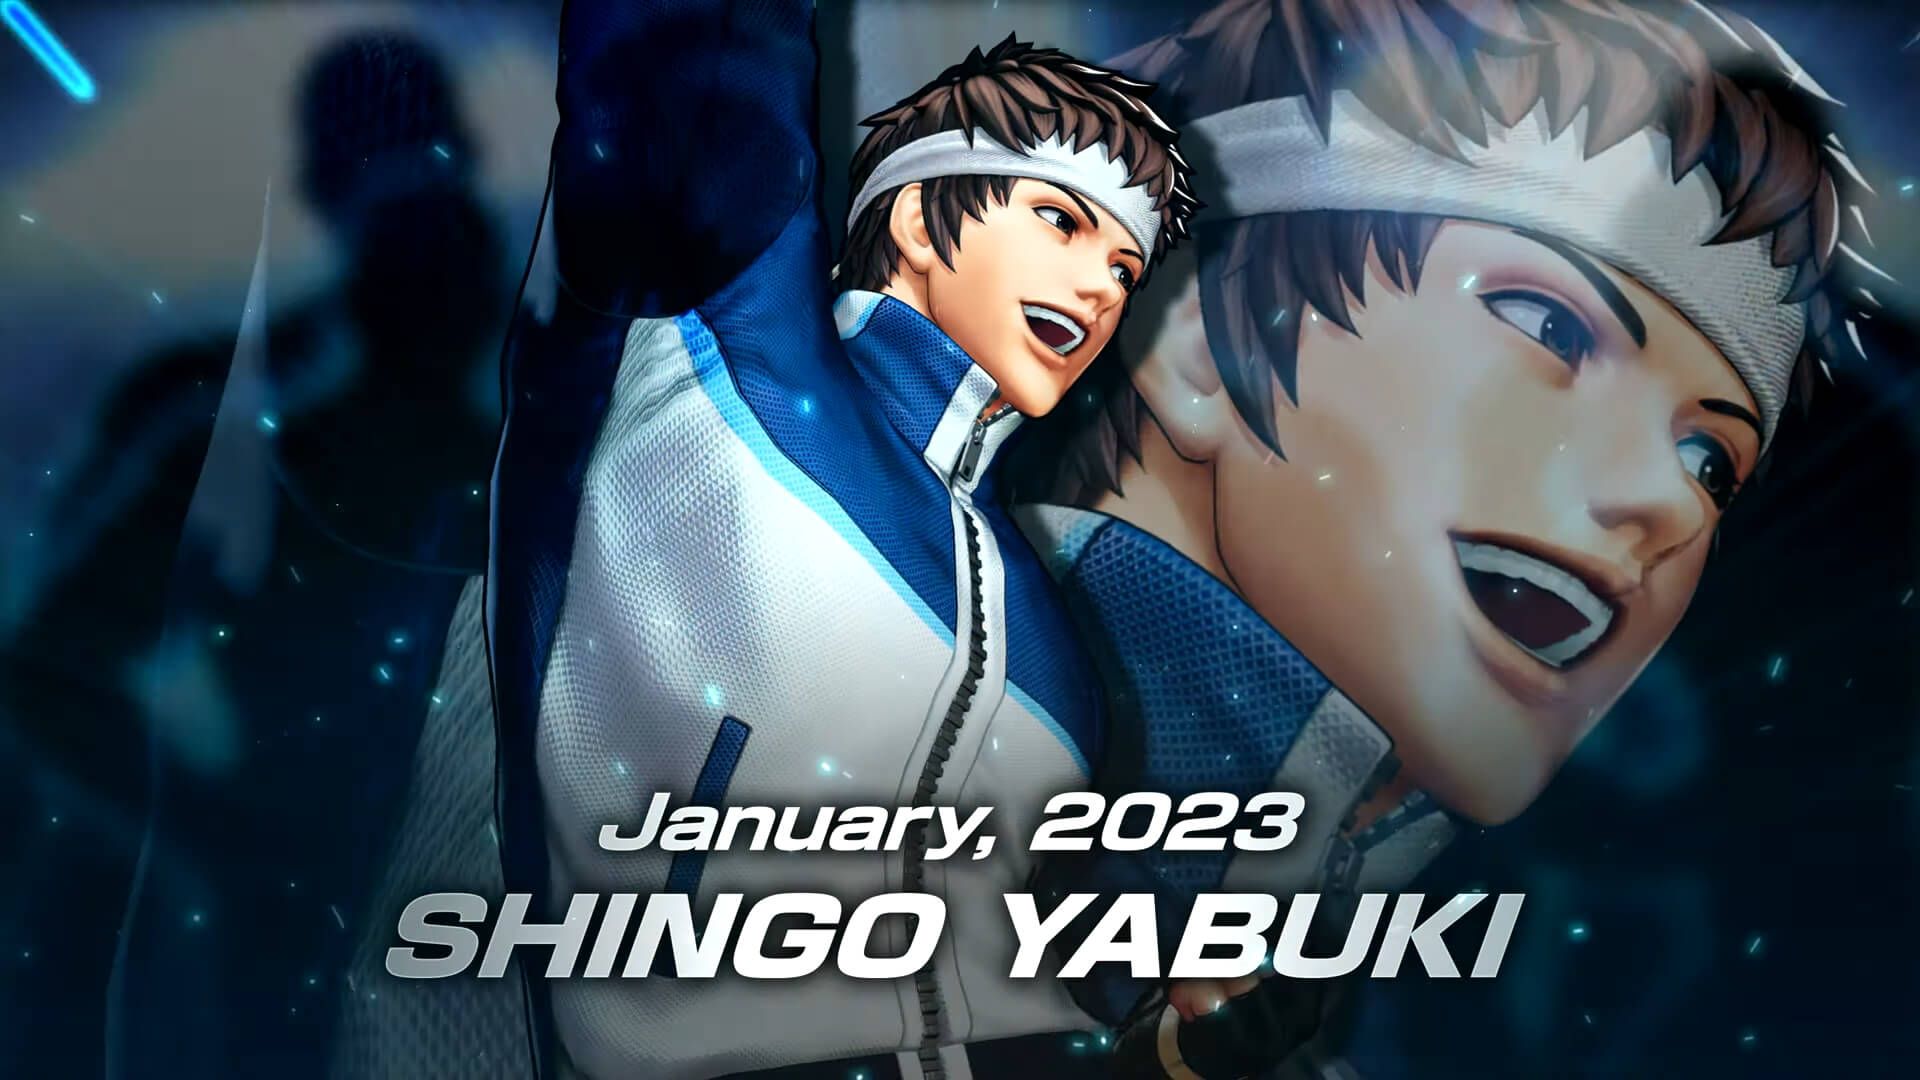 The King of Fighters XV 1.62 Patch and Shingo Yabuki DLC are Out